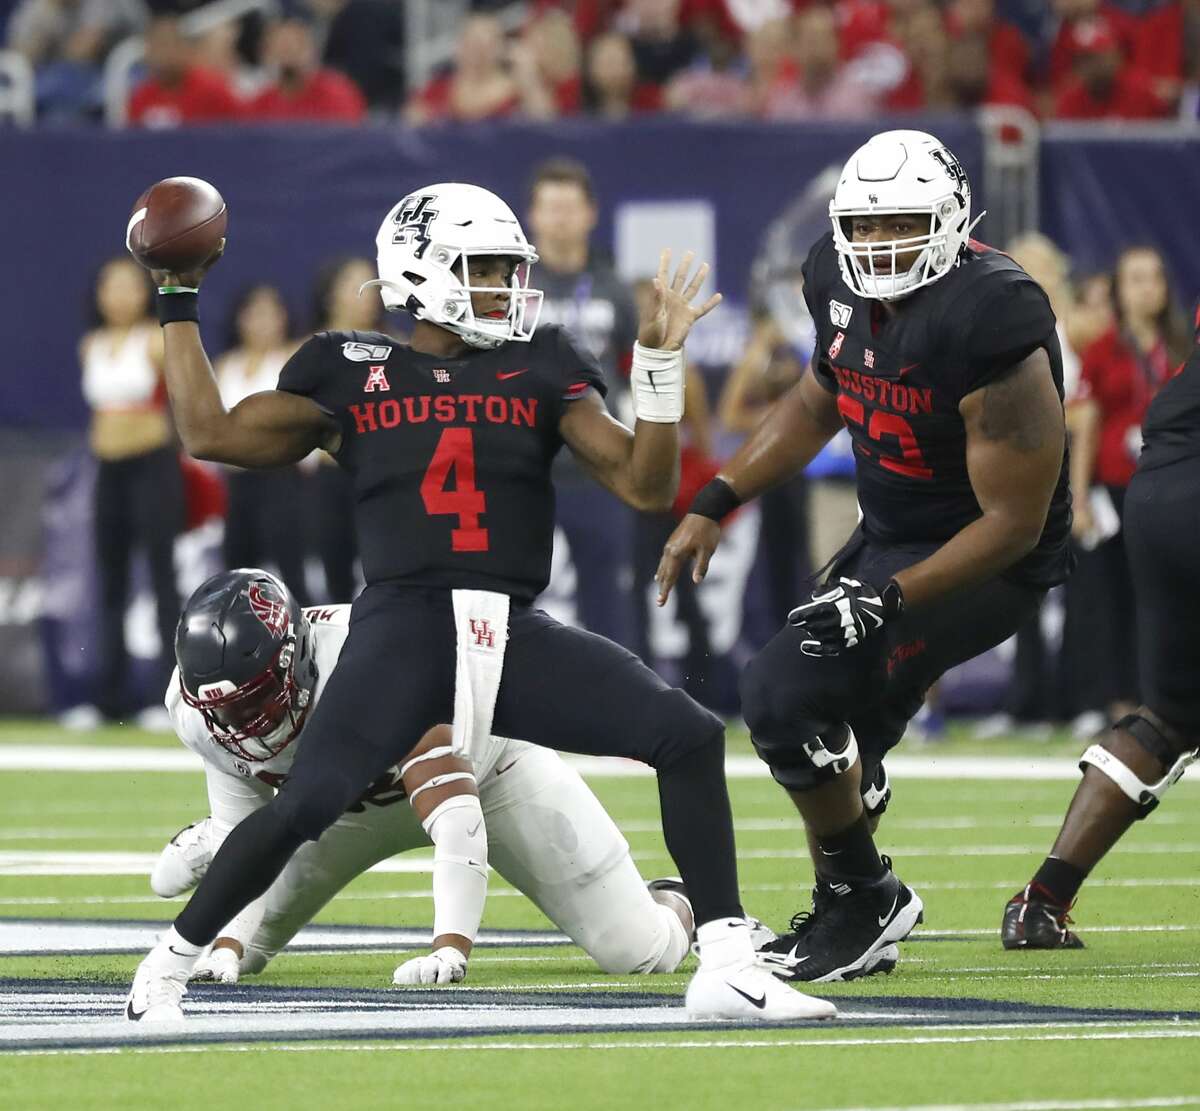 PHOTOS: UH vs. Washington State  Houston Cougars quarterback D'Eriq King (4) looks to pass the ball in the first half of the AdvoCare Texas Kickoff game at NRG Stadium, Friday, Sept. 13, 2019, in Houston. >>>See photos from the Cougars' Week 2 game ... 